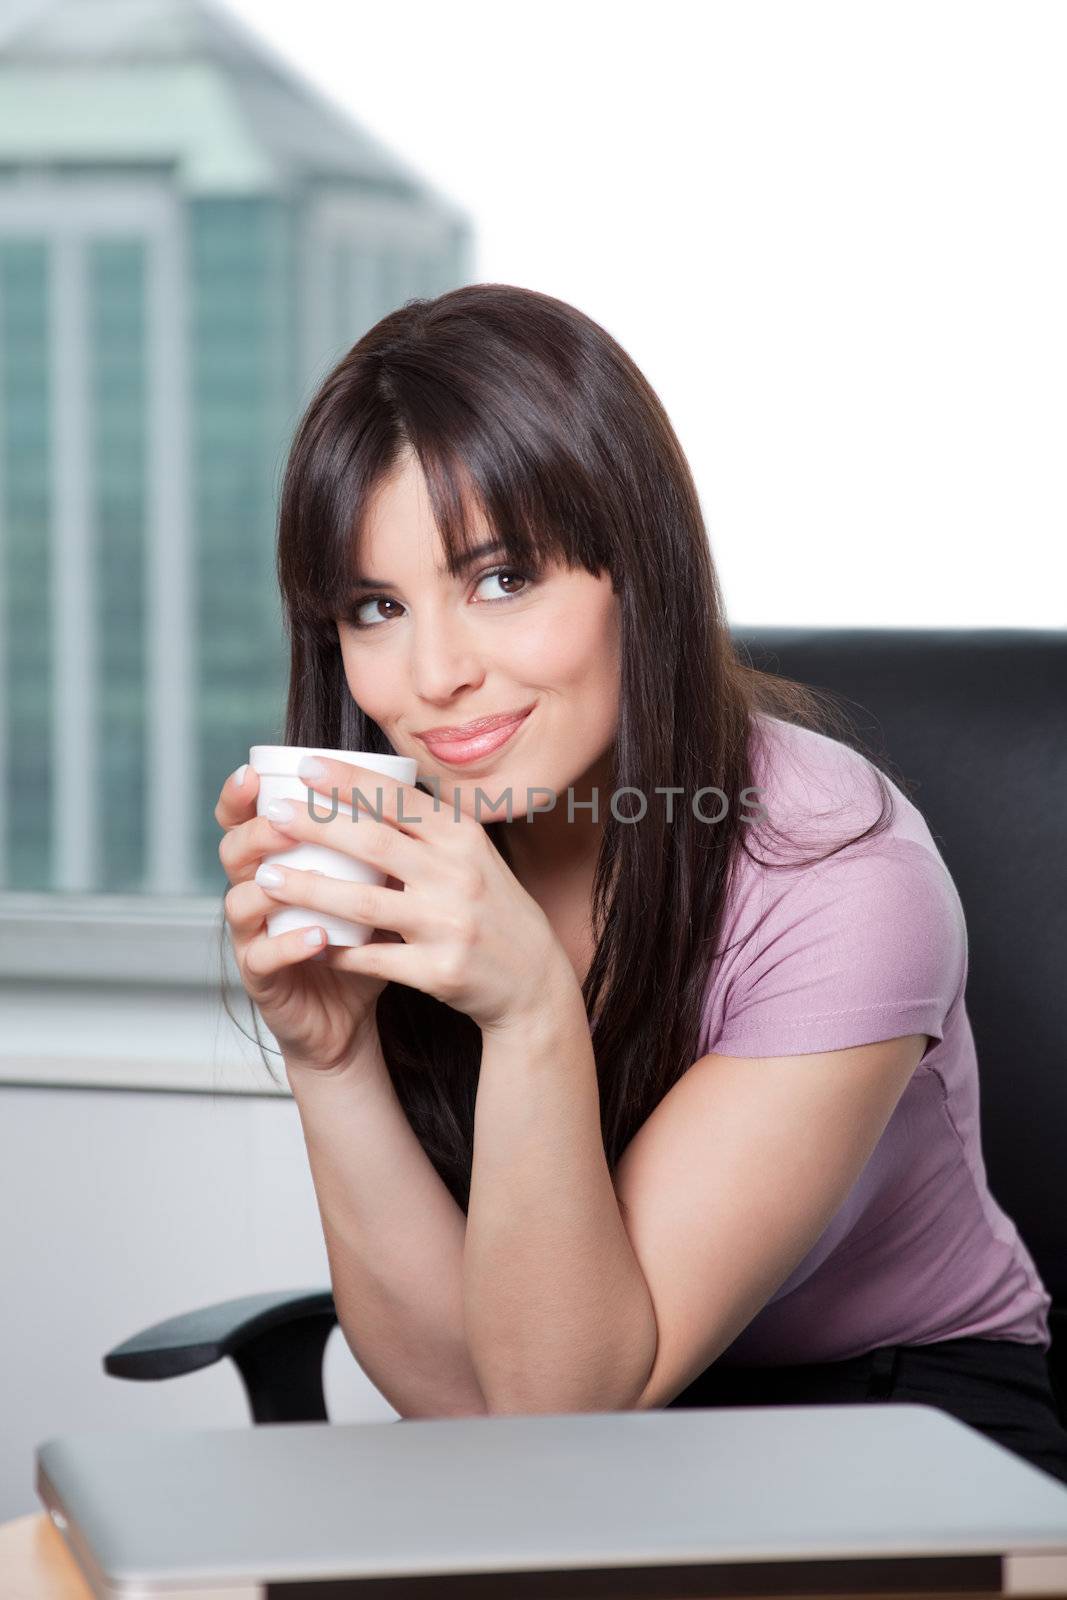 Portrait of a business woman holding coffee cup and dreaming